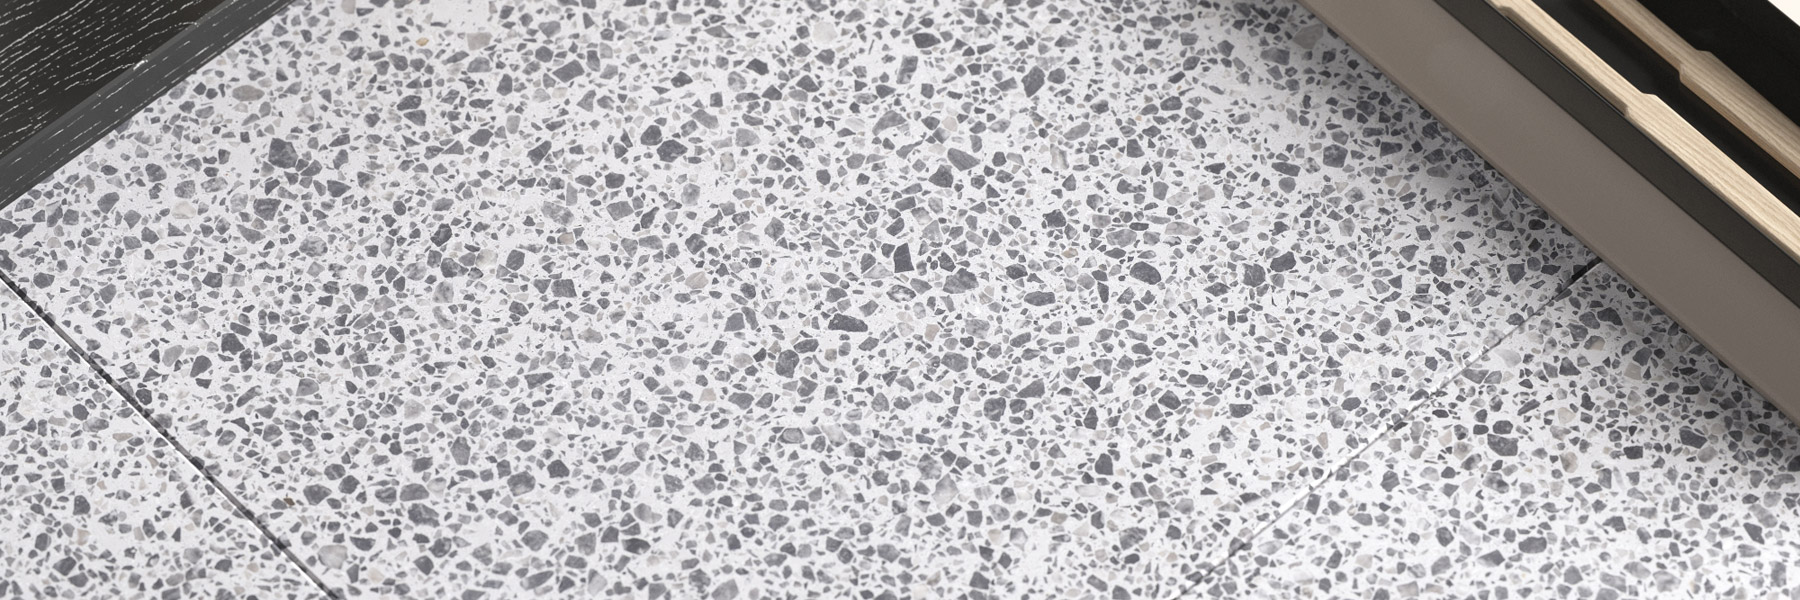 COMPAC, COMPACSURFACES, COMPAC THE SURFACE COMPANY, PETRA, GREY TERRAZZO